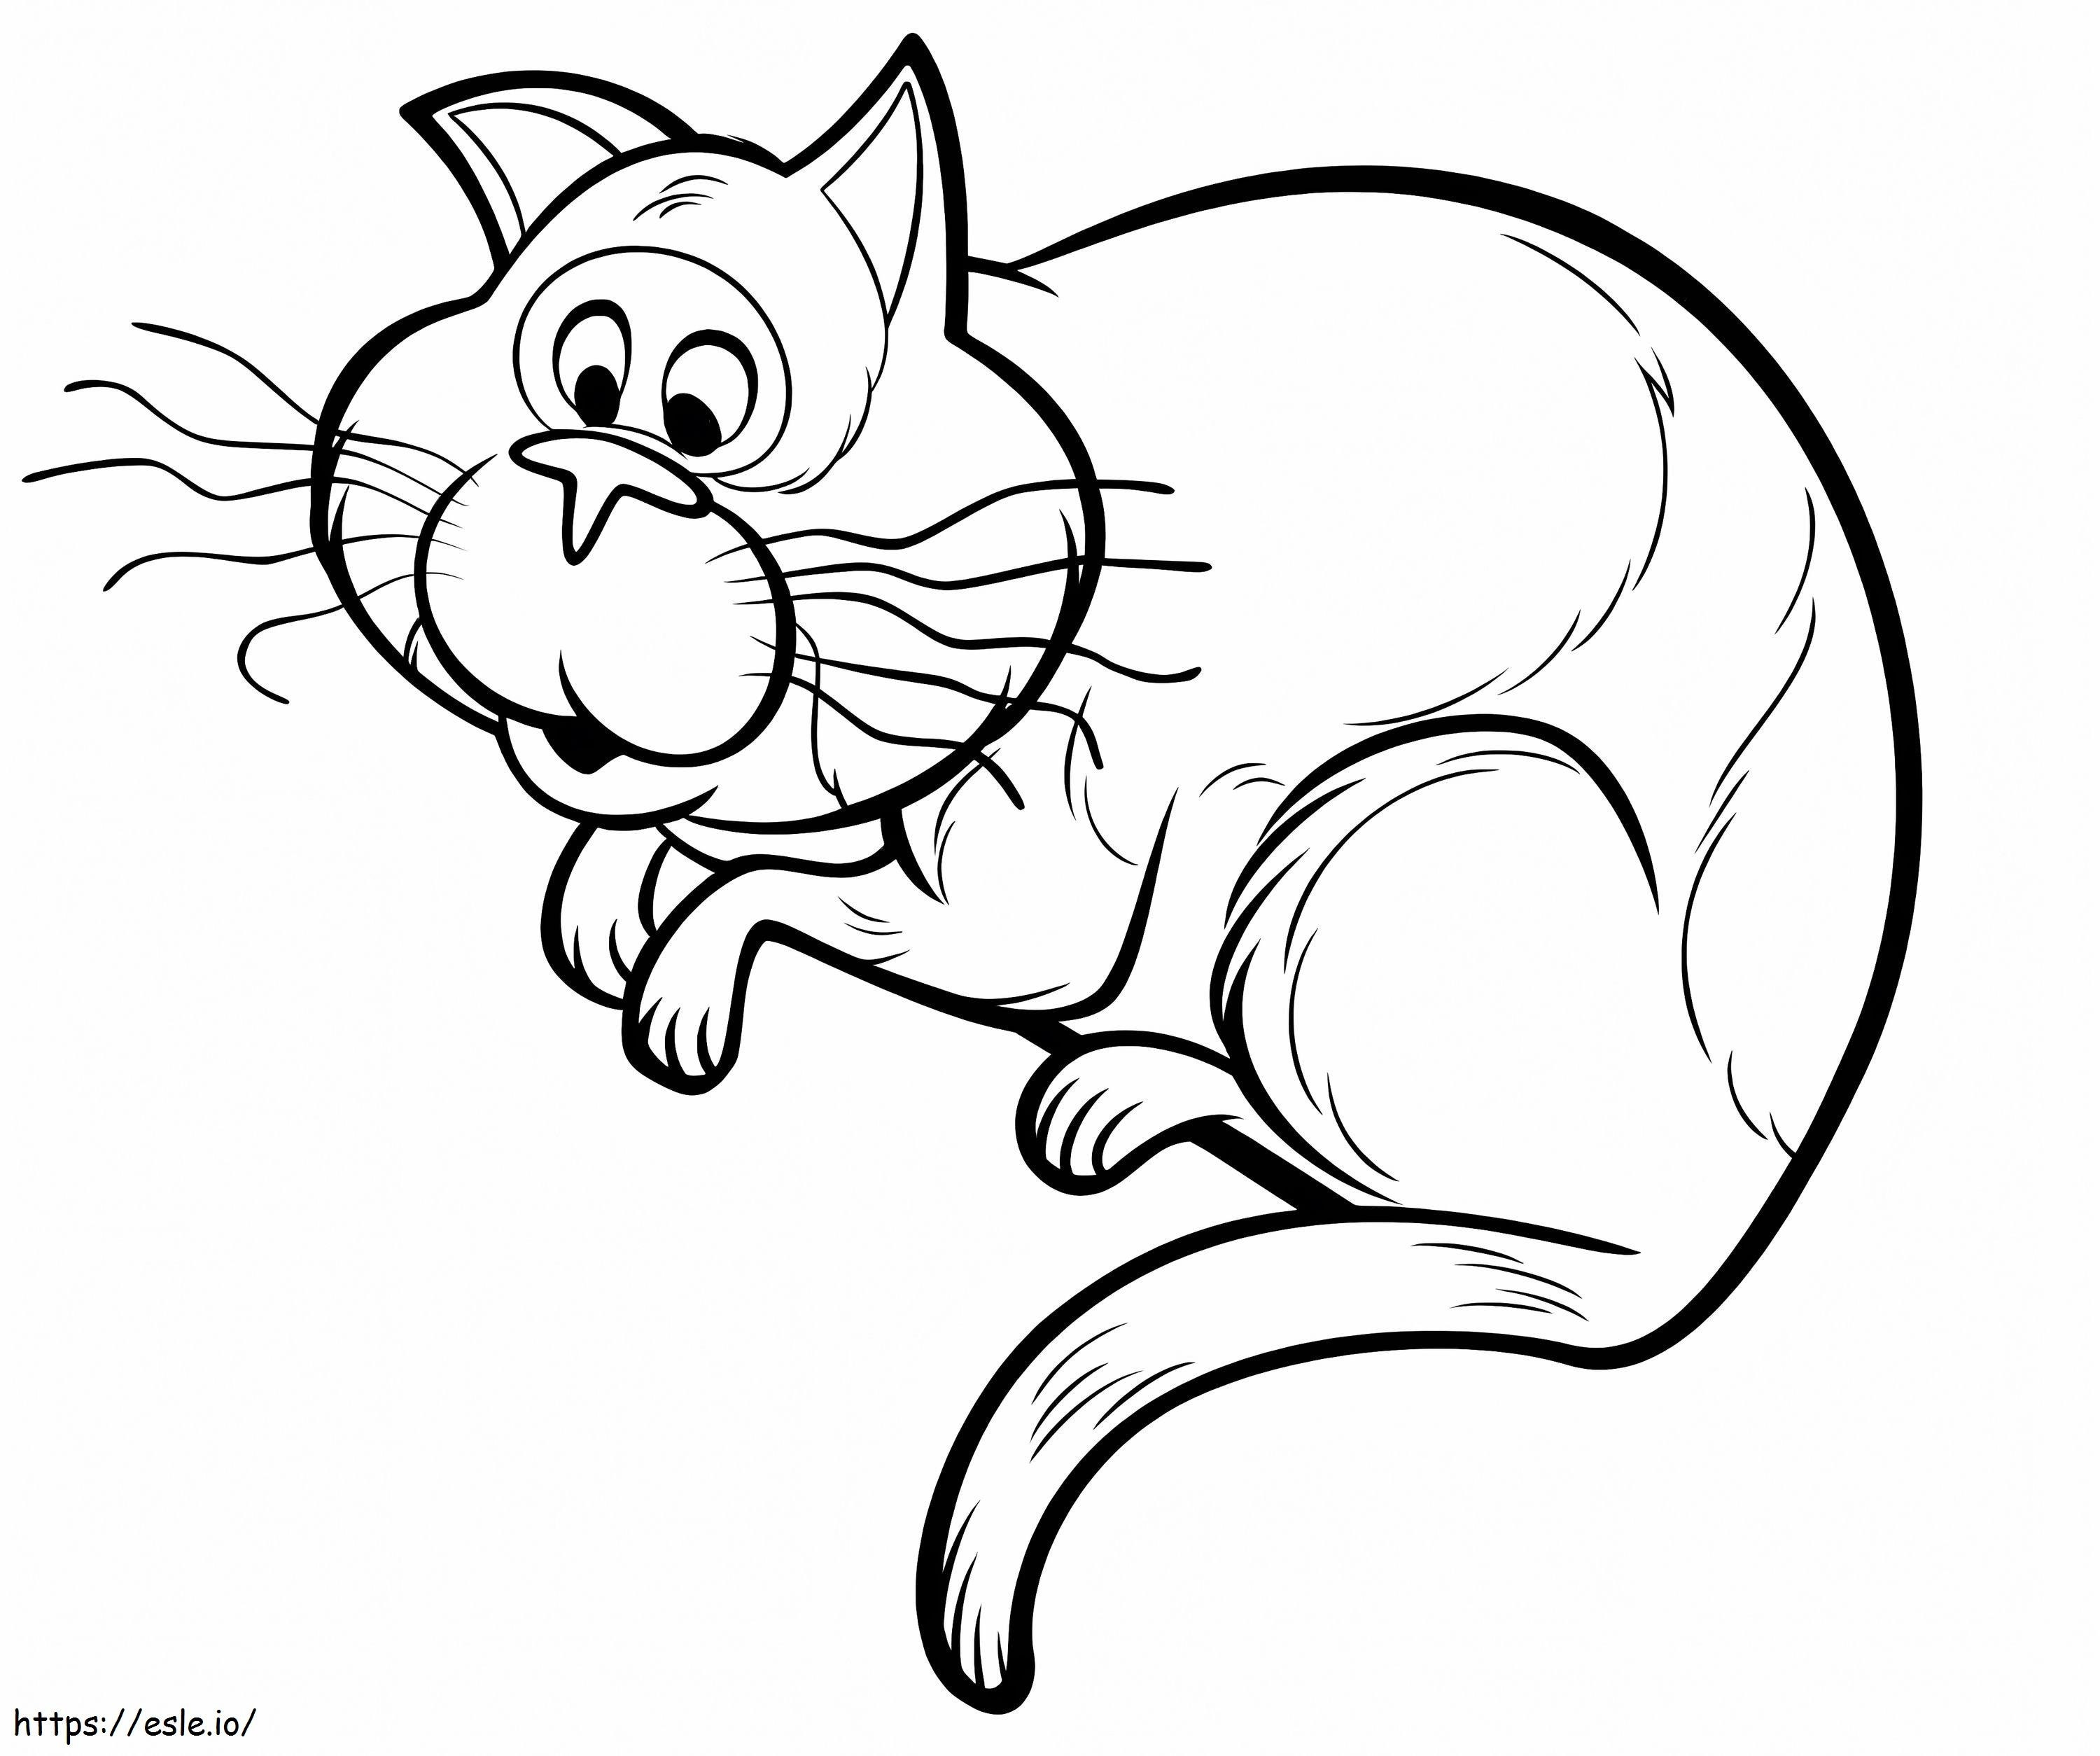 Mr. Mittens From Soul coloring page